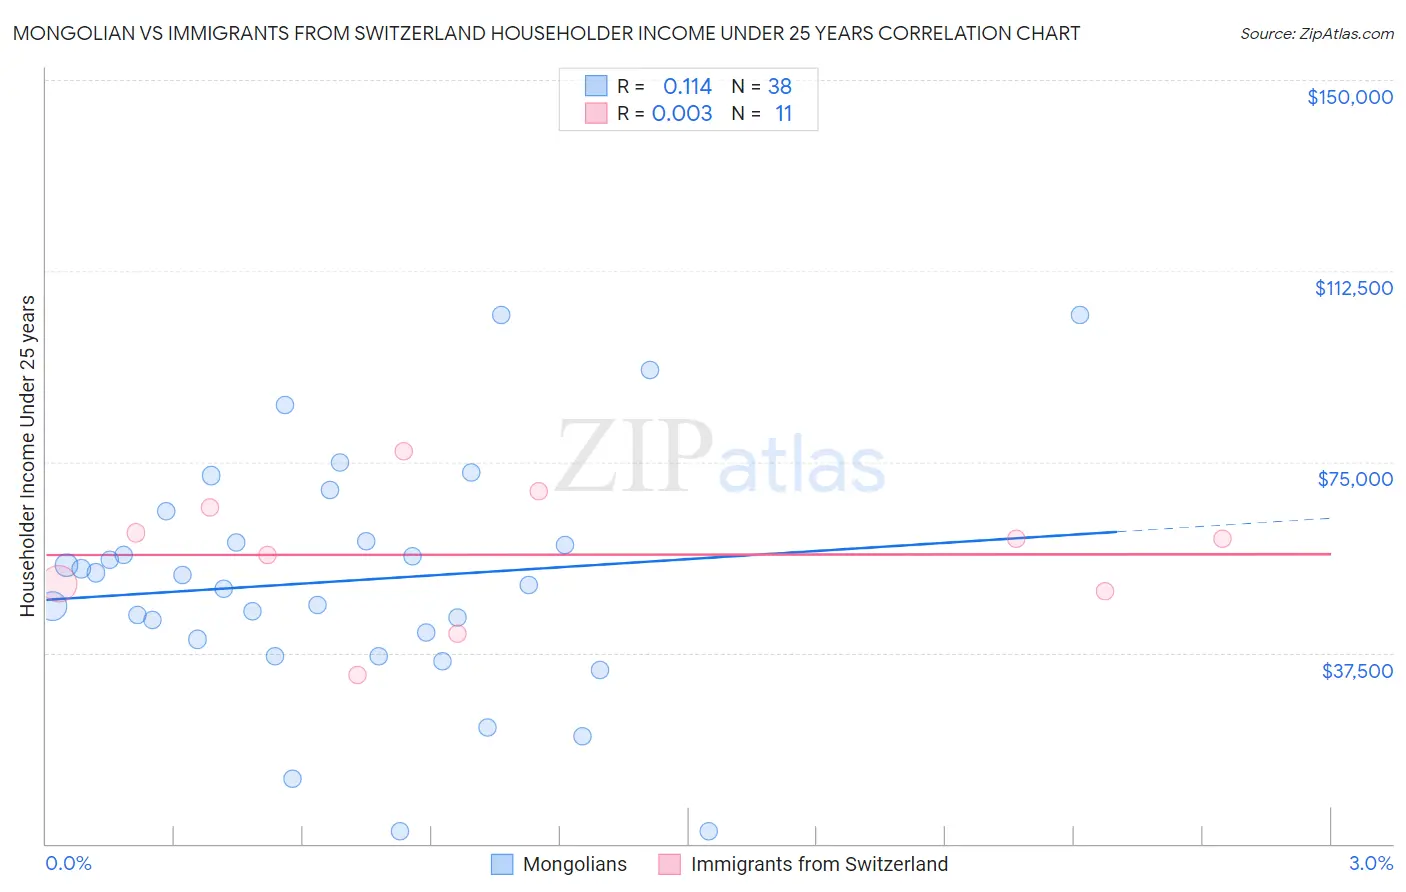 Mongolian vs Immigrants from Switzerland Householder Income Under 25 years